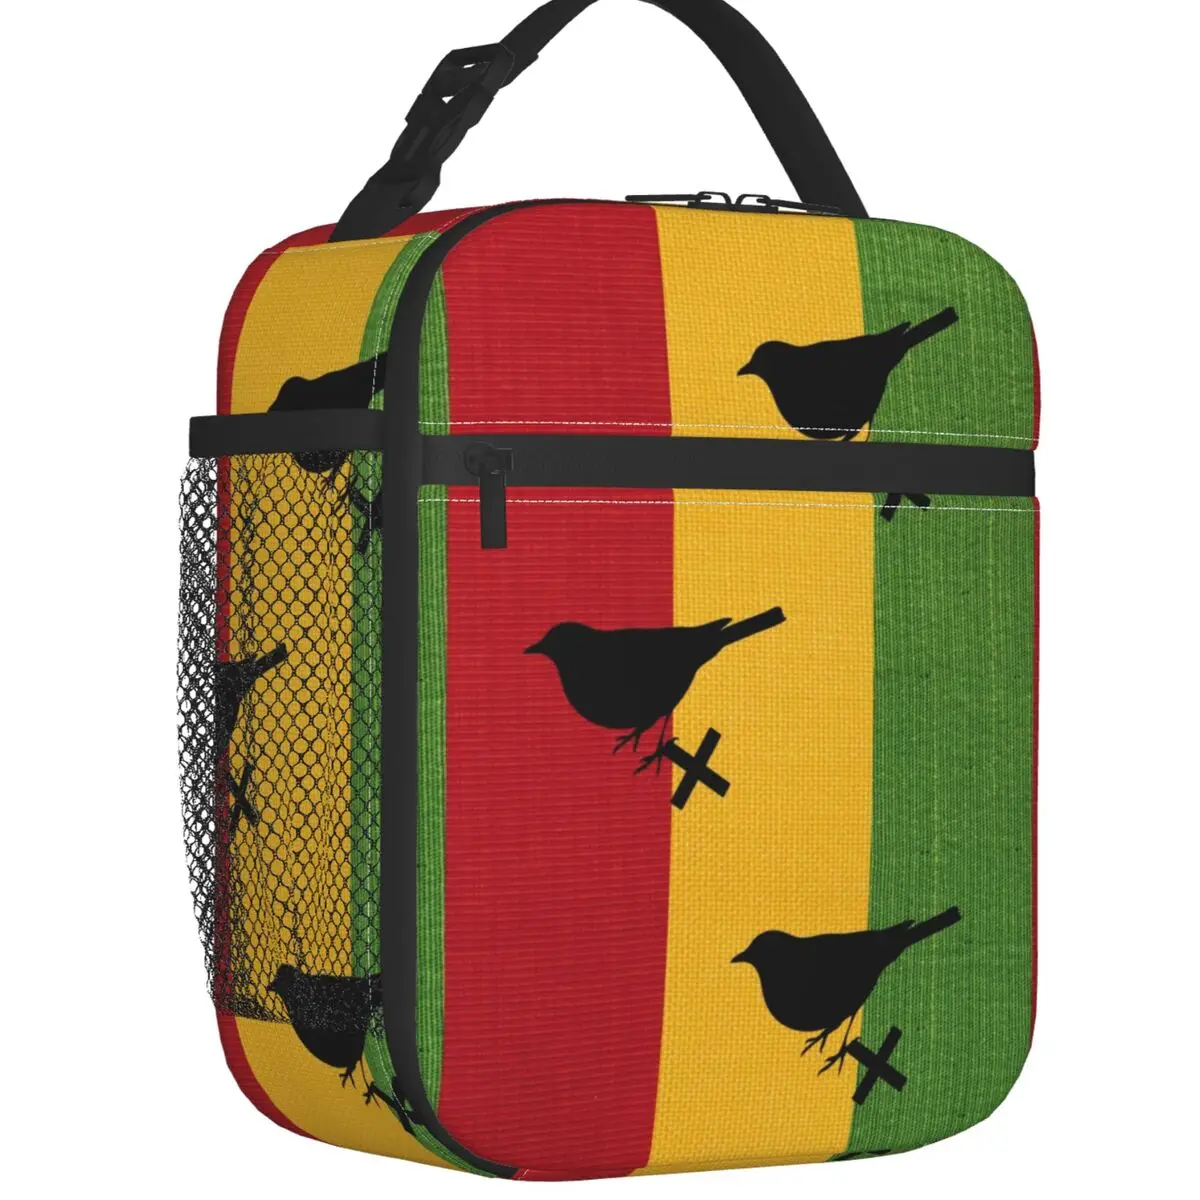 

Vintage Ajax Bob Marley Insulated Lunch Tote Bag for Women Three Birds Resuable Thermal Cooler Bento Box School